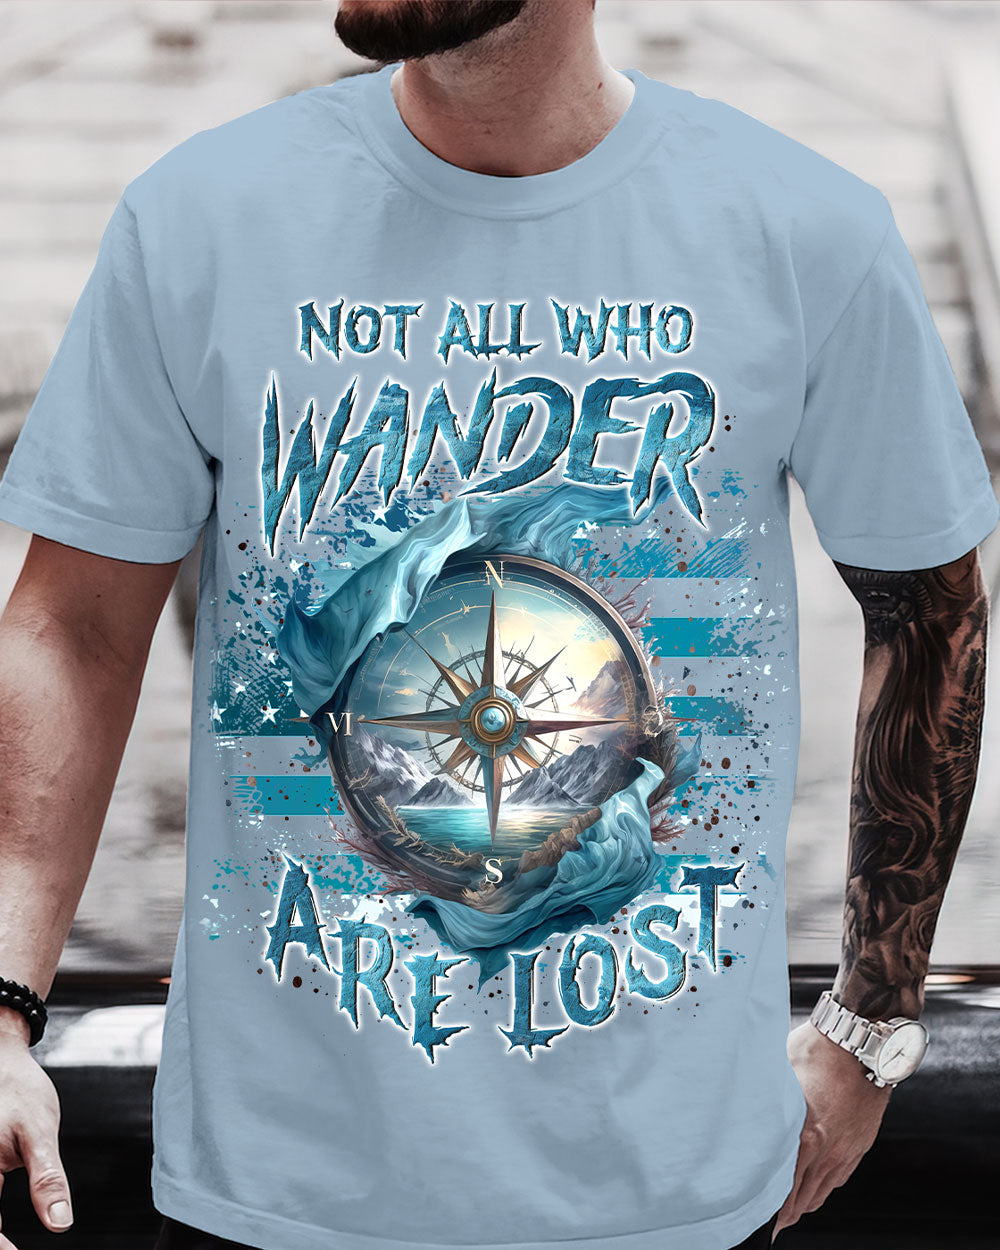 NOT ALL WHO WANDER ARE LOST COTTON SHIRT - YHLN1603246